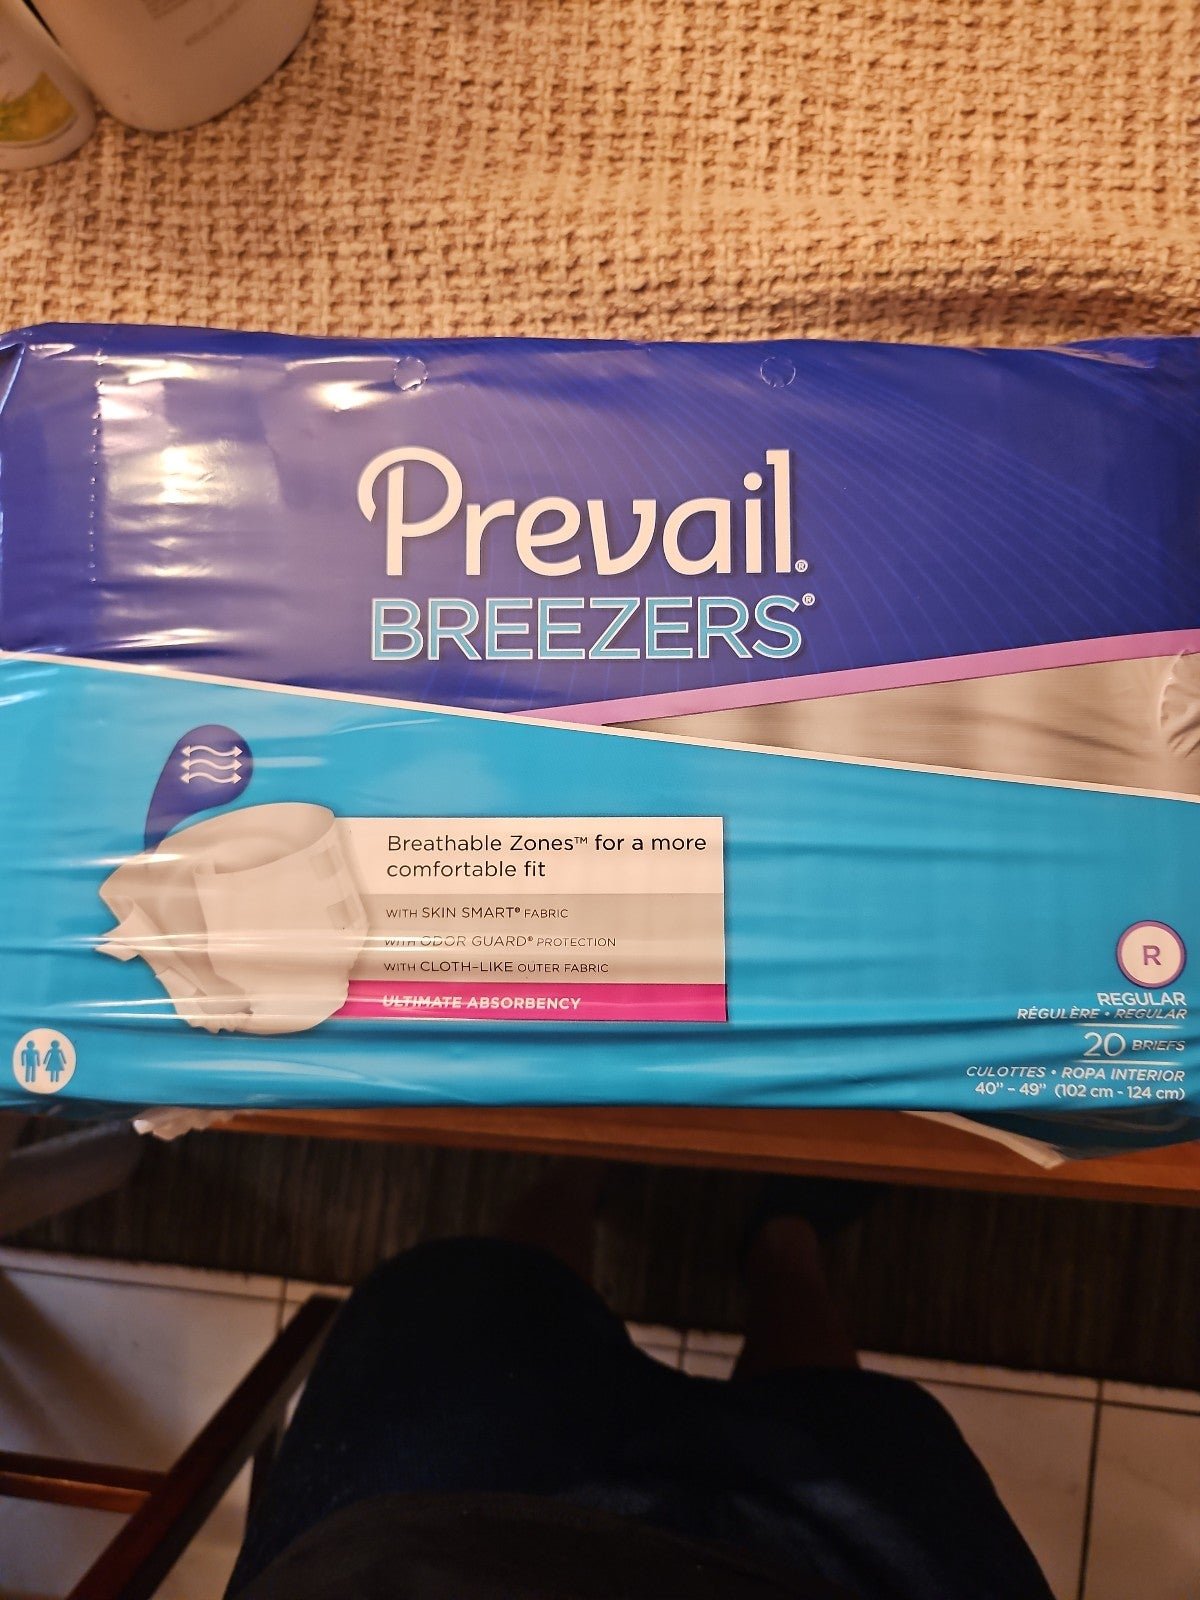 Prevail adult diapers FX9surriO